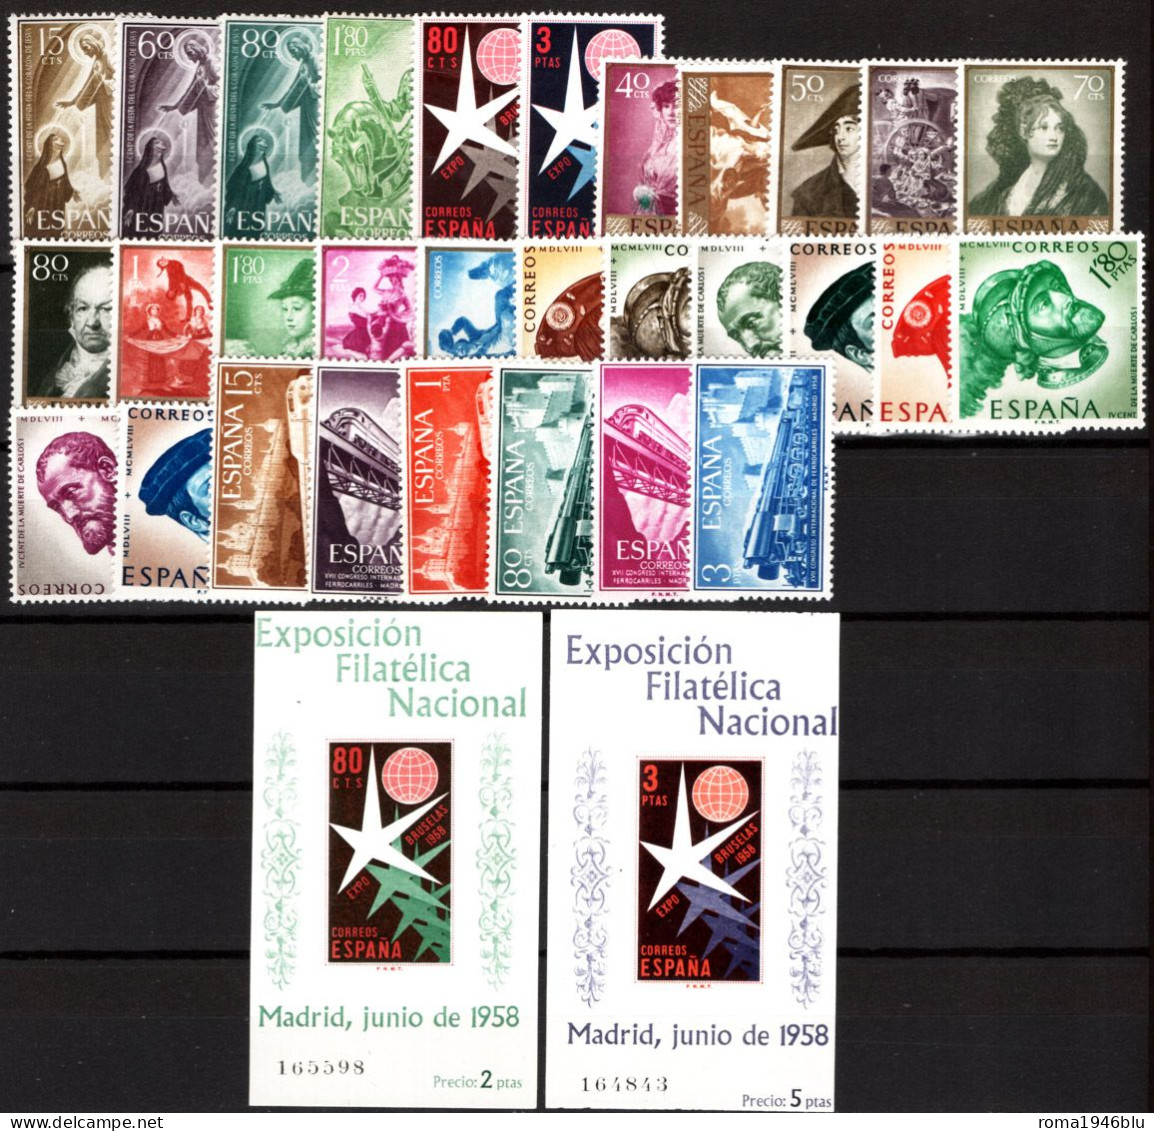 Spagna 1957/58 Annate Completa / Complete Year Set **/MNH VF/F - Años Completos